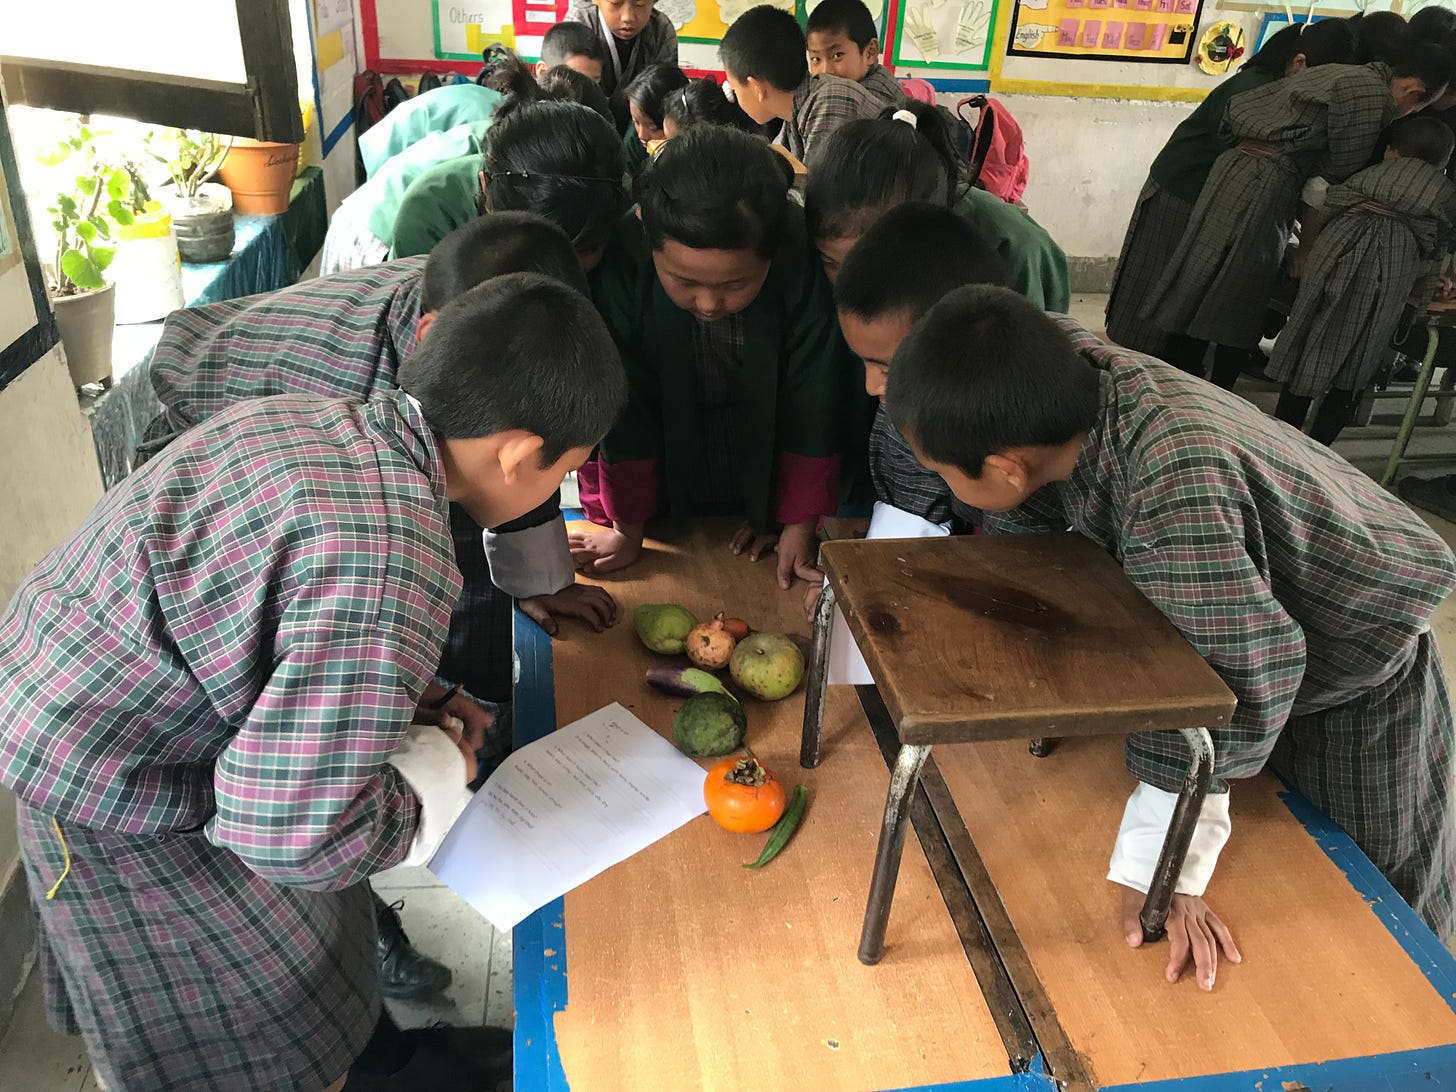 Bhutanese students gather in a group for a science lesson on fruits and vegetables.